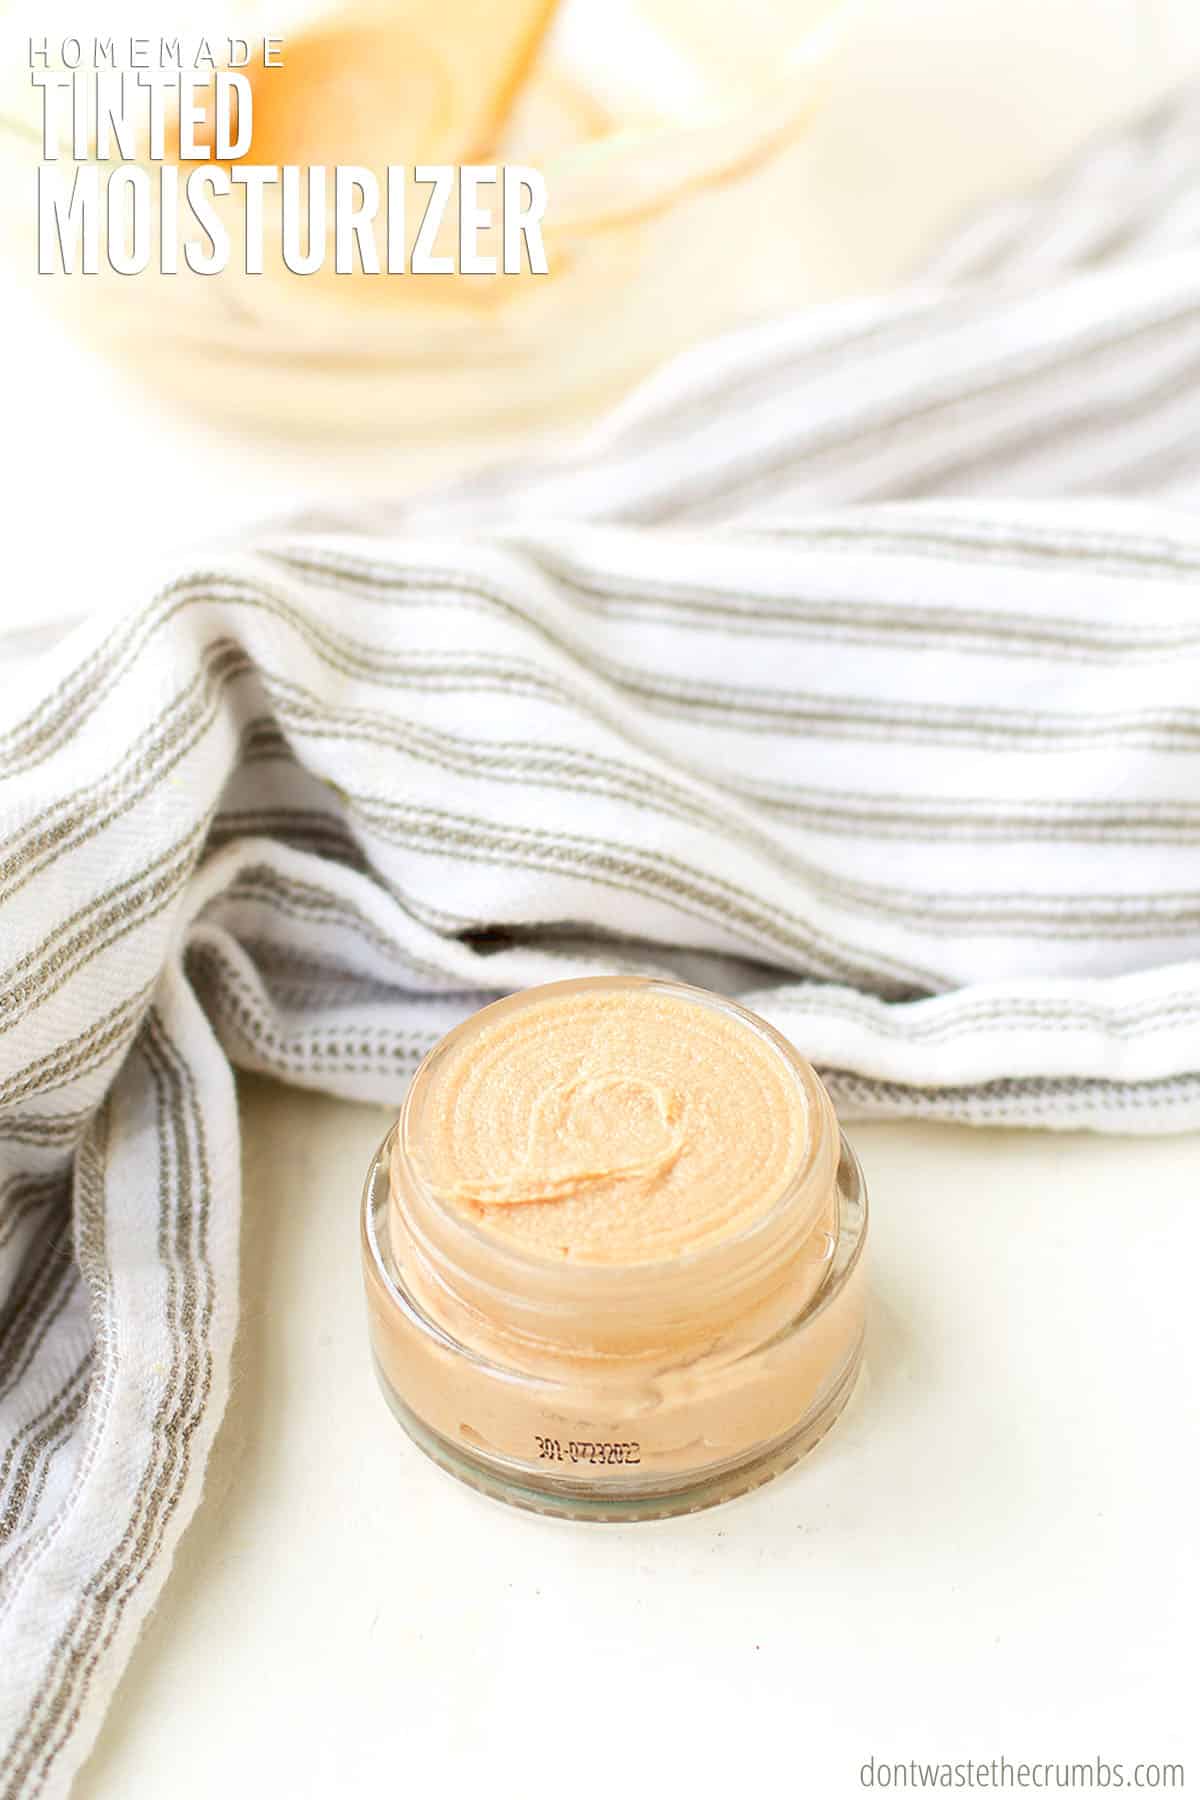 At less than $1 per batch, this homemade tinted moisturizer recipe will replace your other lotions, likely filled with toxic chemicals that cost too much!!